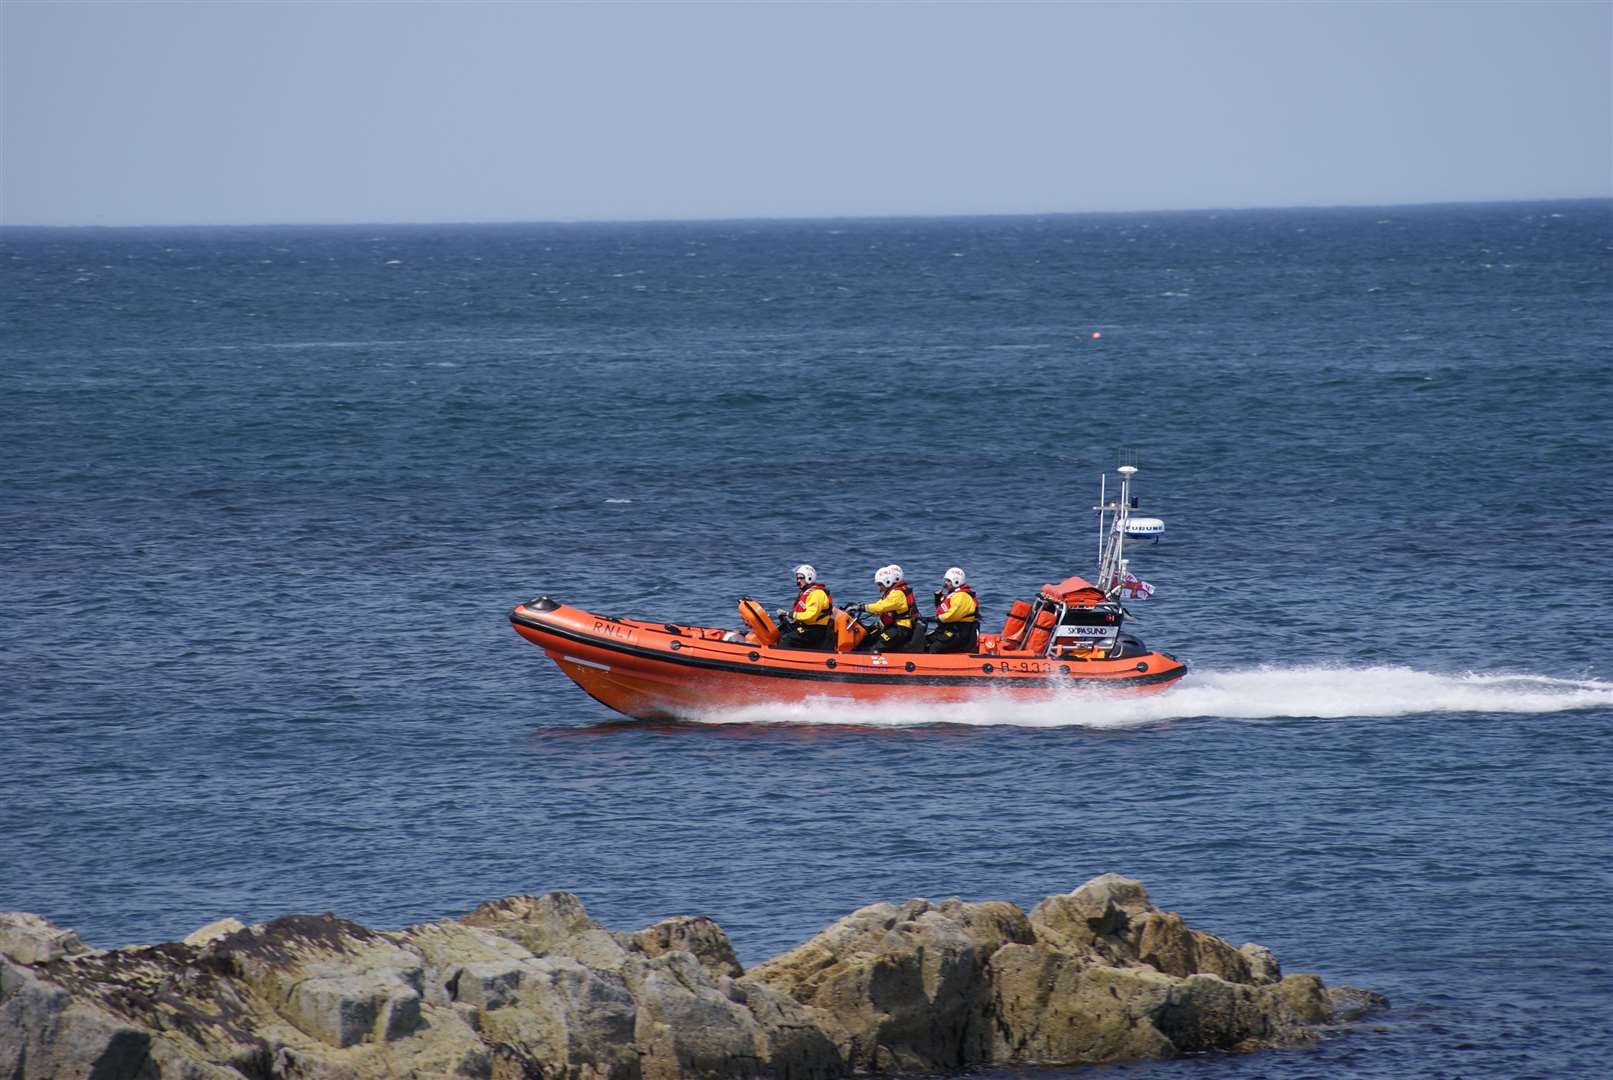 Macduff lifeboat was called out to help rescue the kayakers.